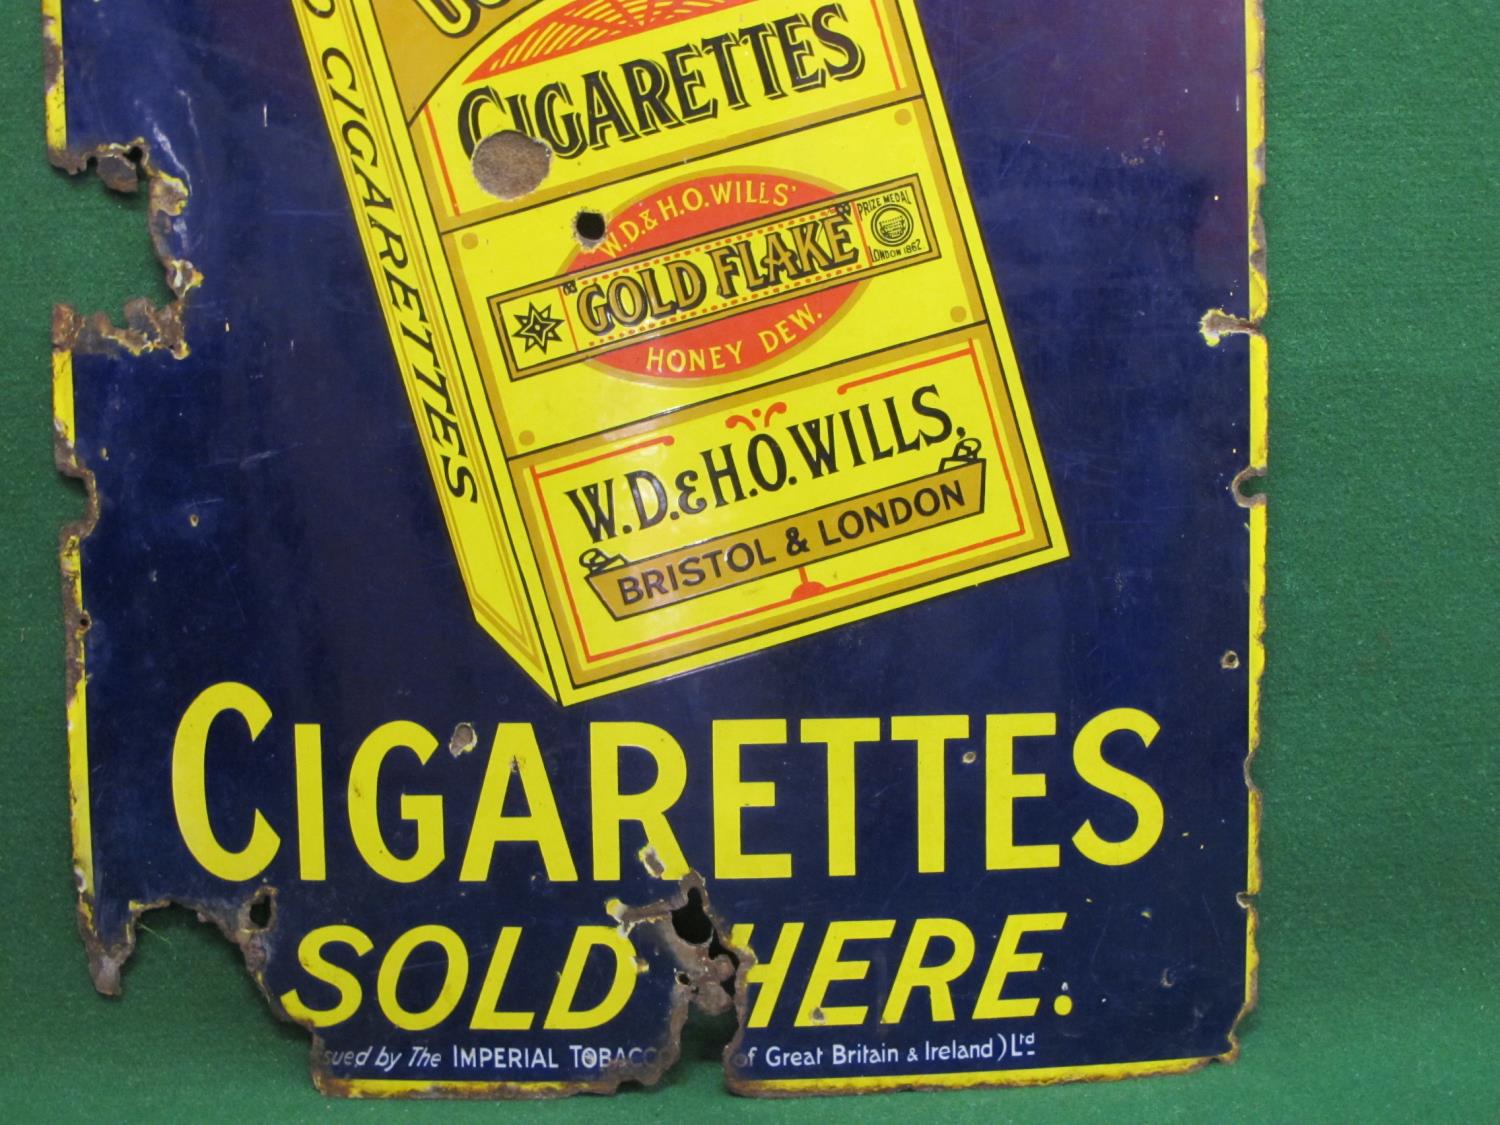 Enamel sign for Wills's Cigarettes Sold Here featuring a packet of Gold Flake Honeydew. Yellow, - Image 2 of 4